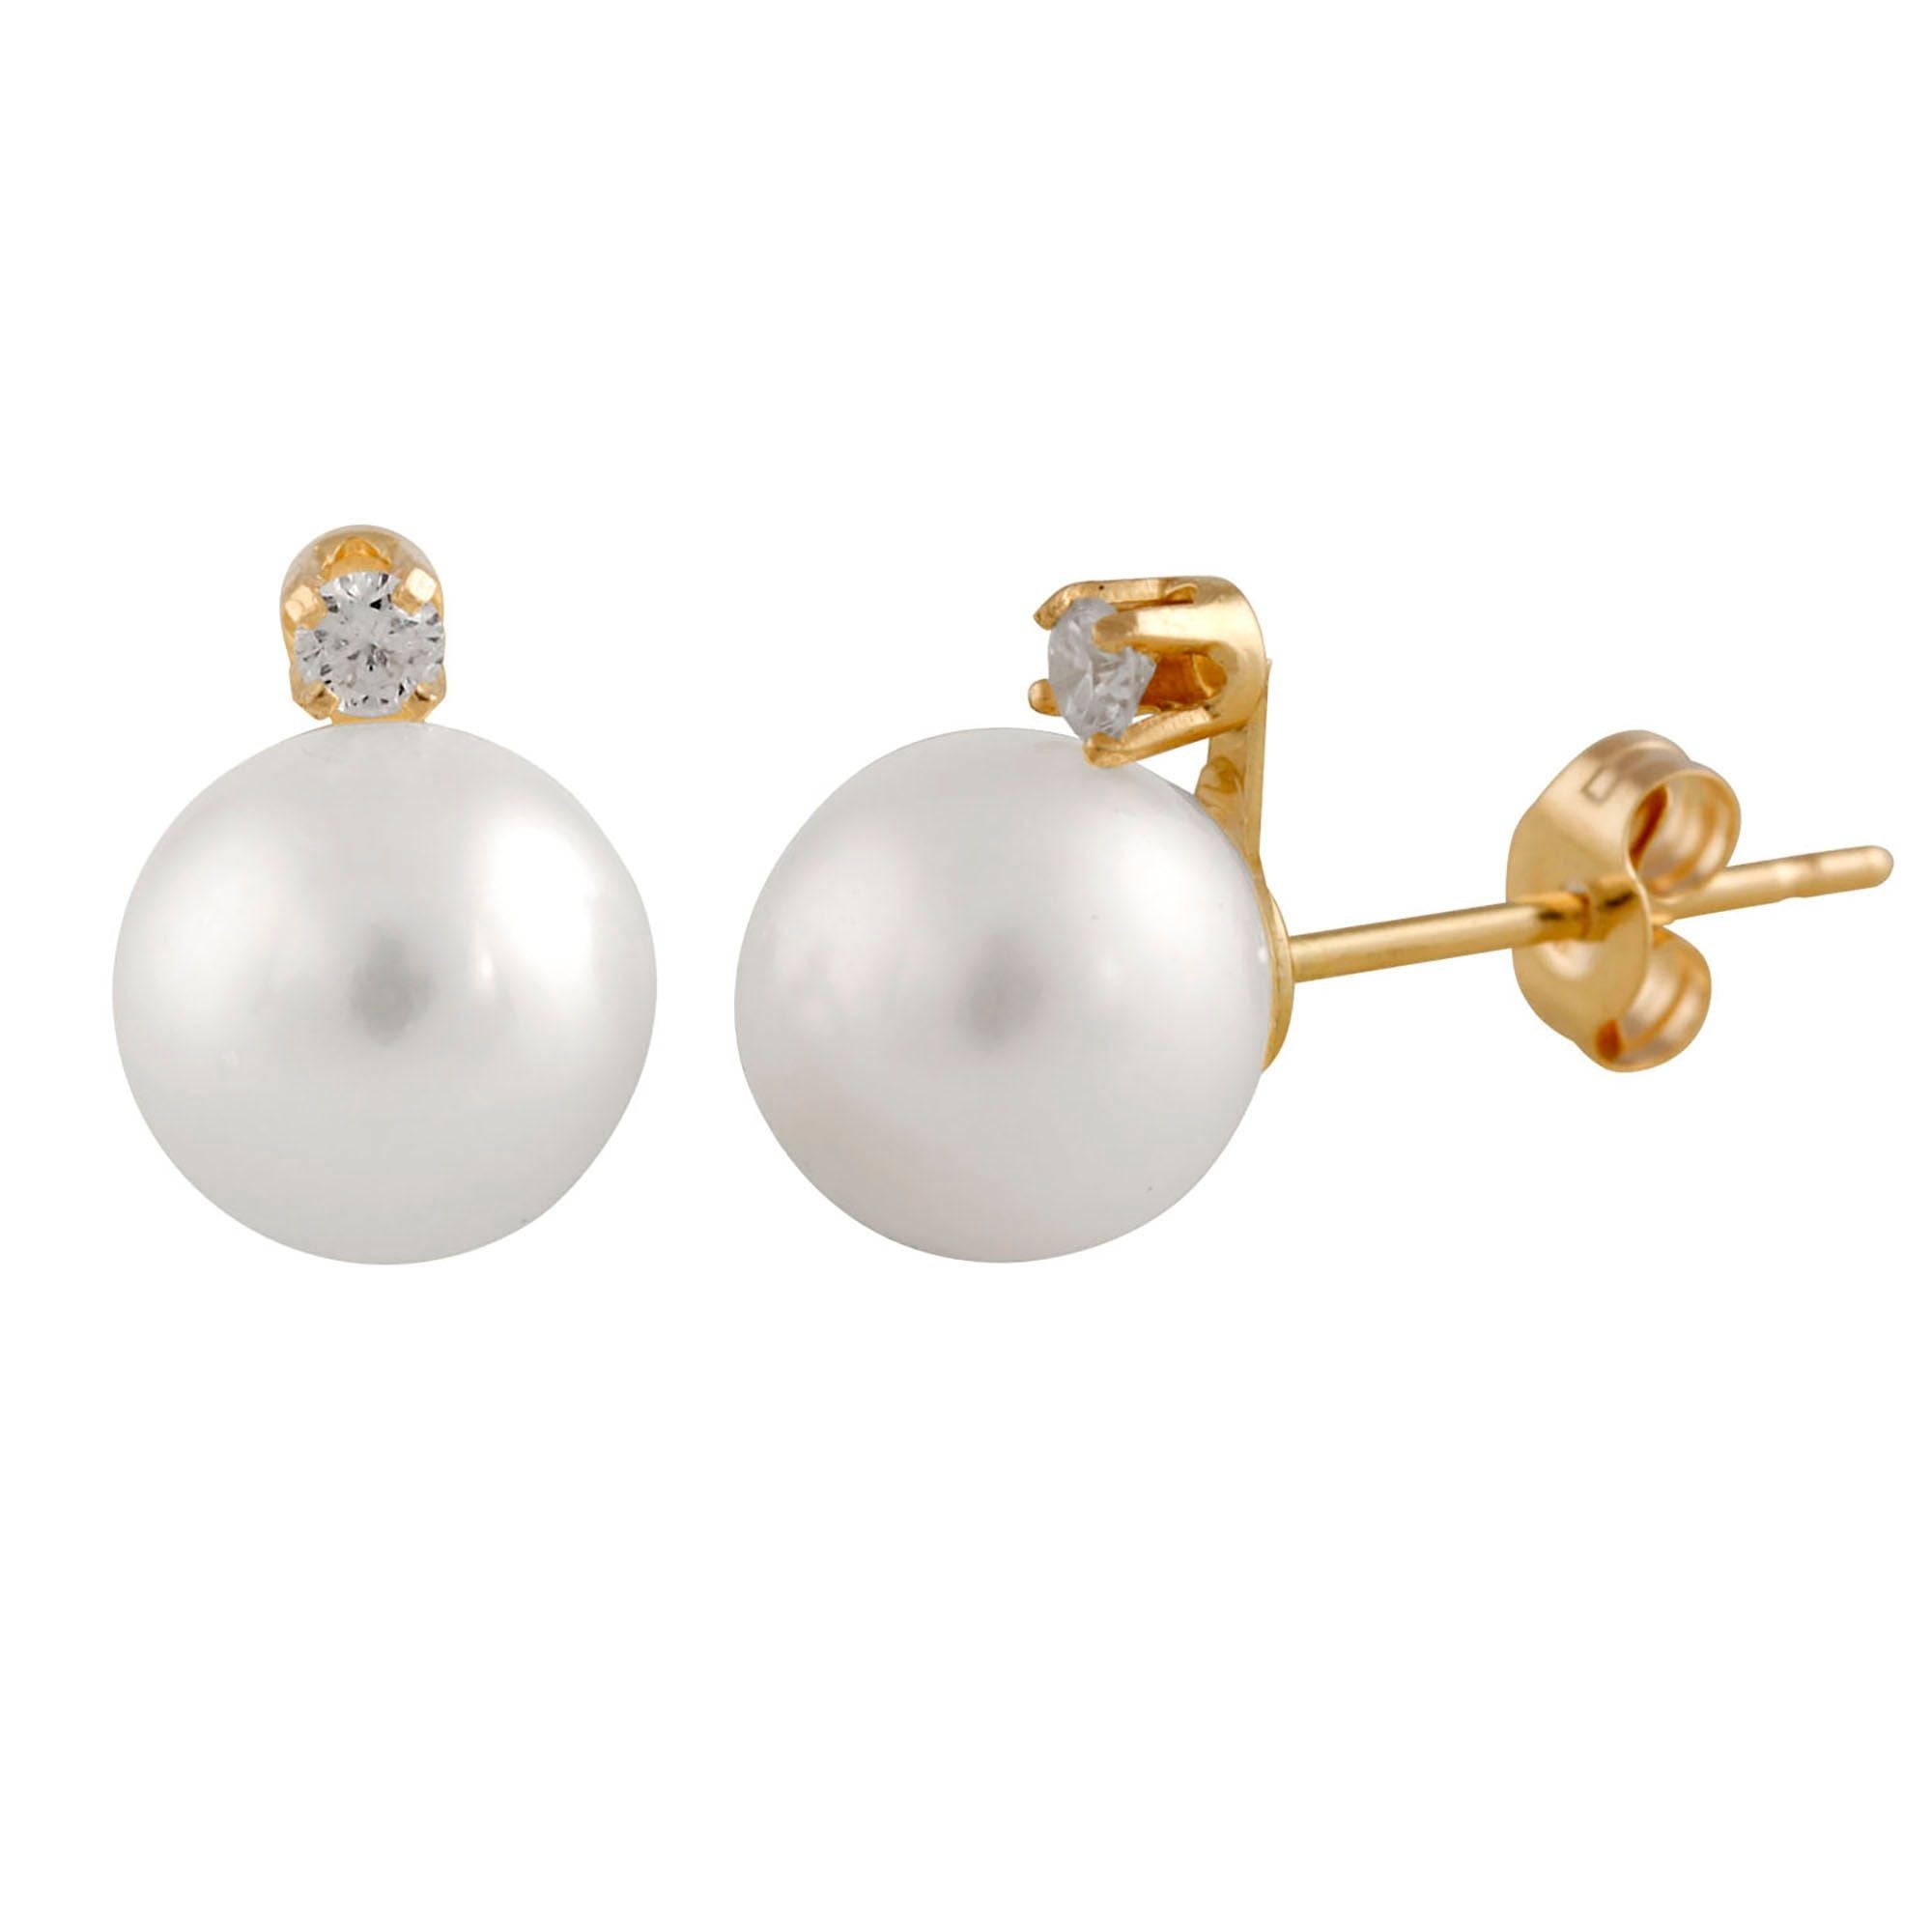 title:Splendid Pearls 14K Yellow Gold Diamond Earrings RB-66WY;color:White